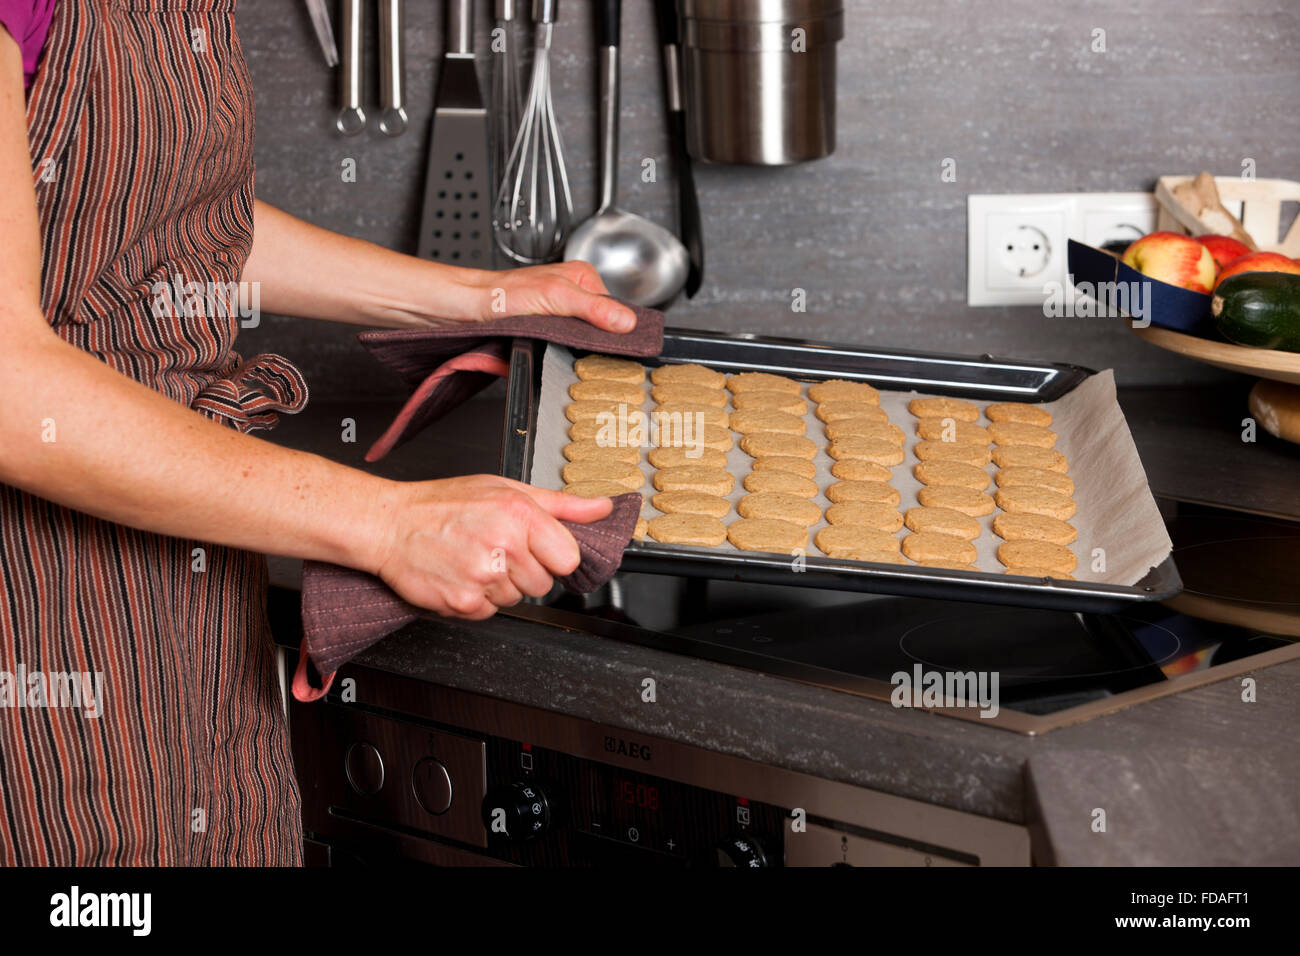 Woman taking finished cookies out of oven Stock Photo